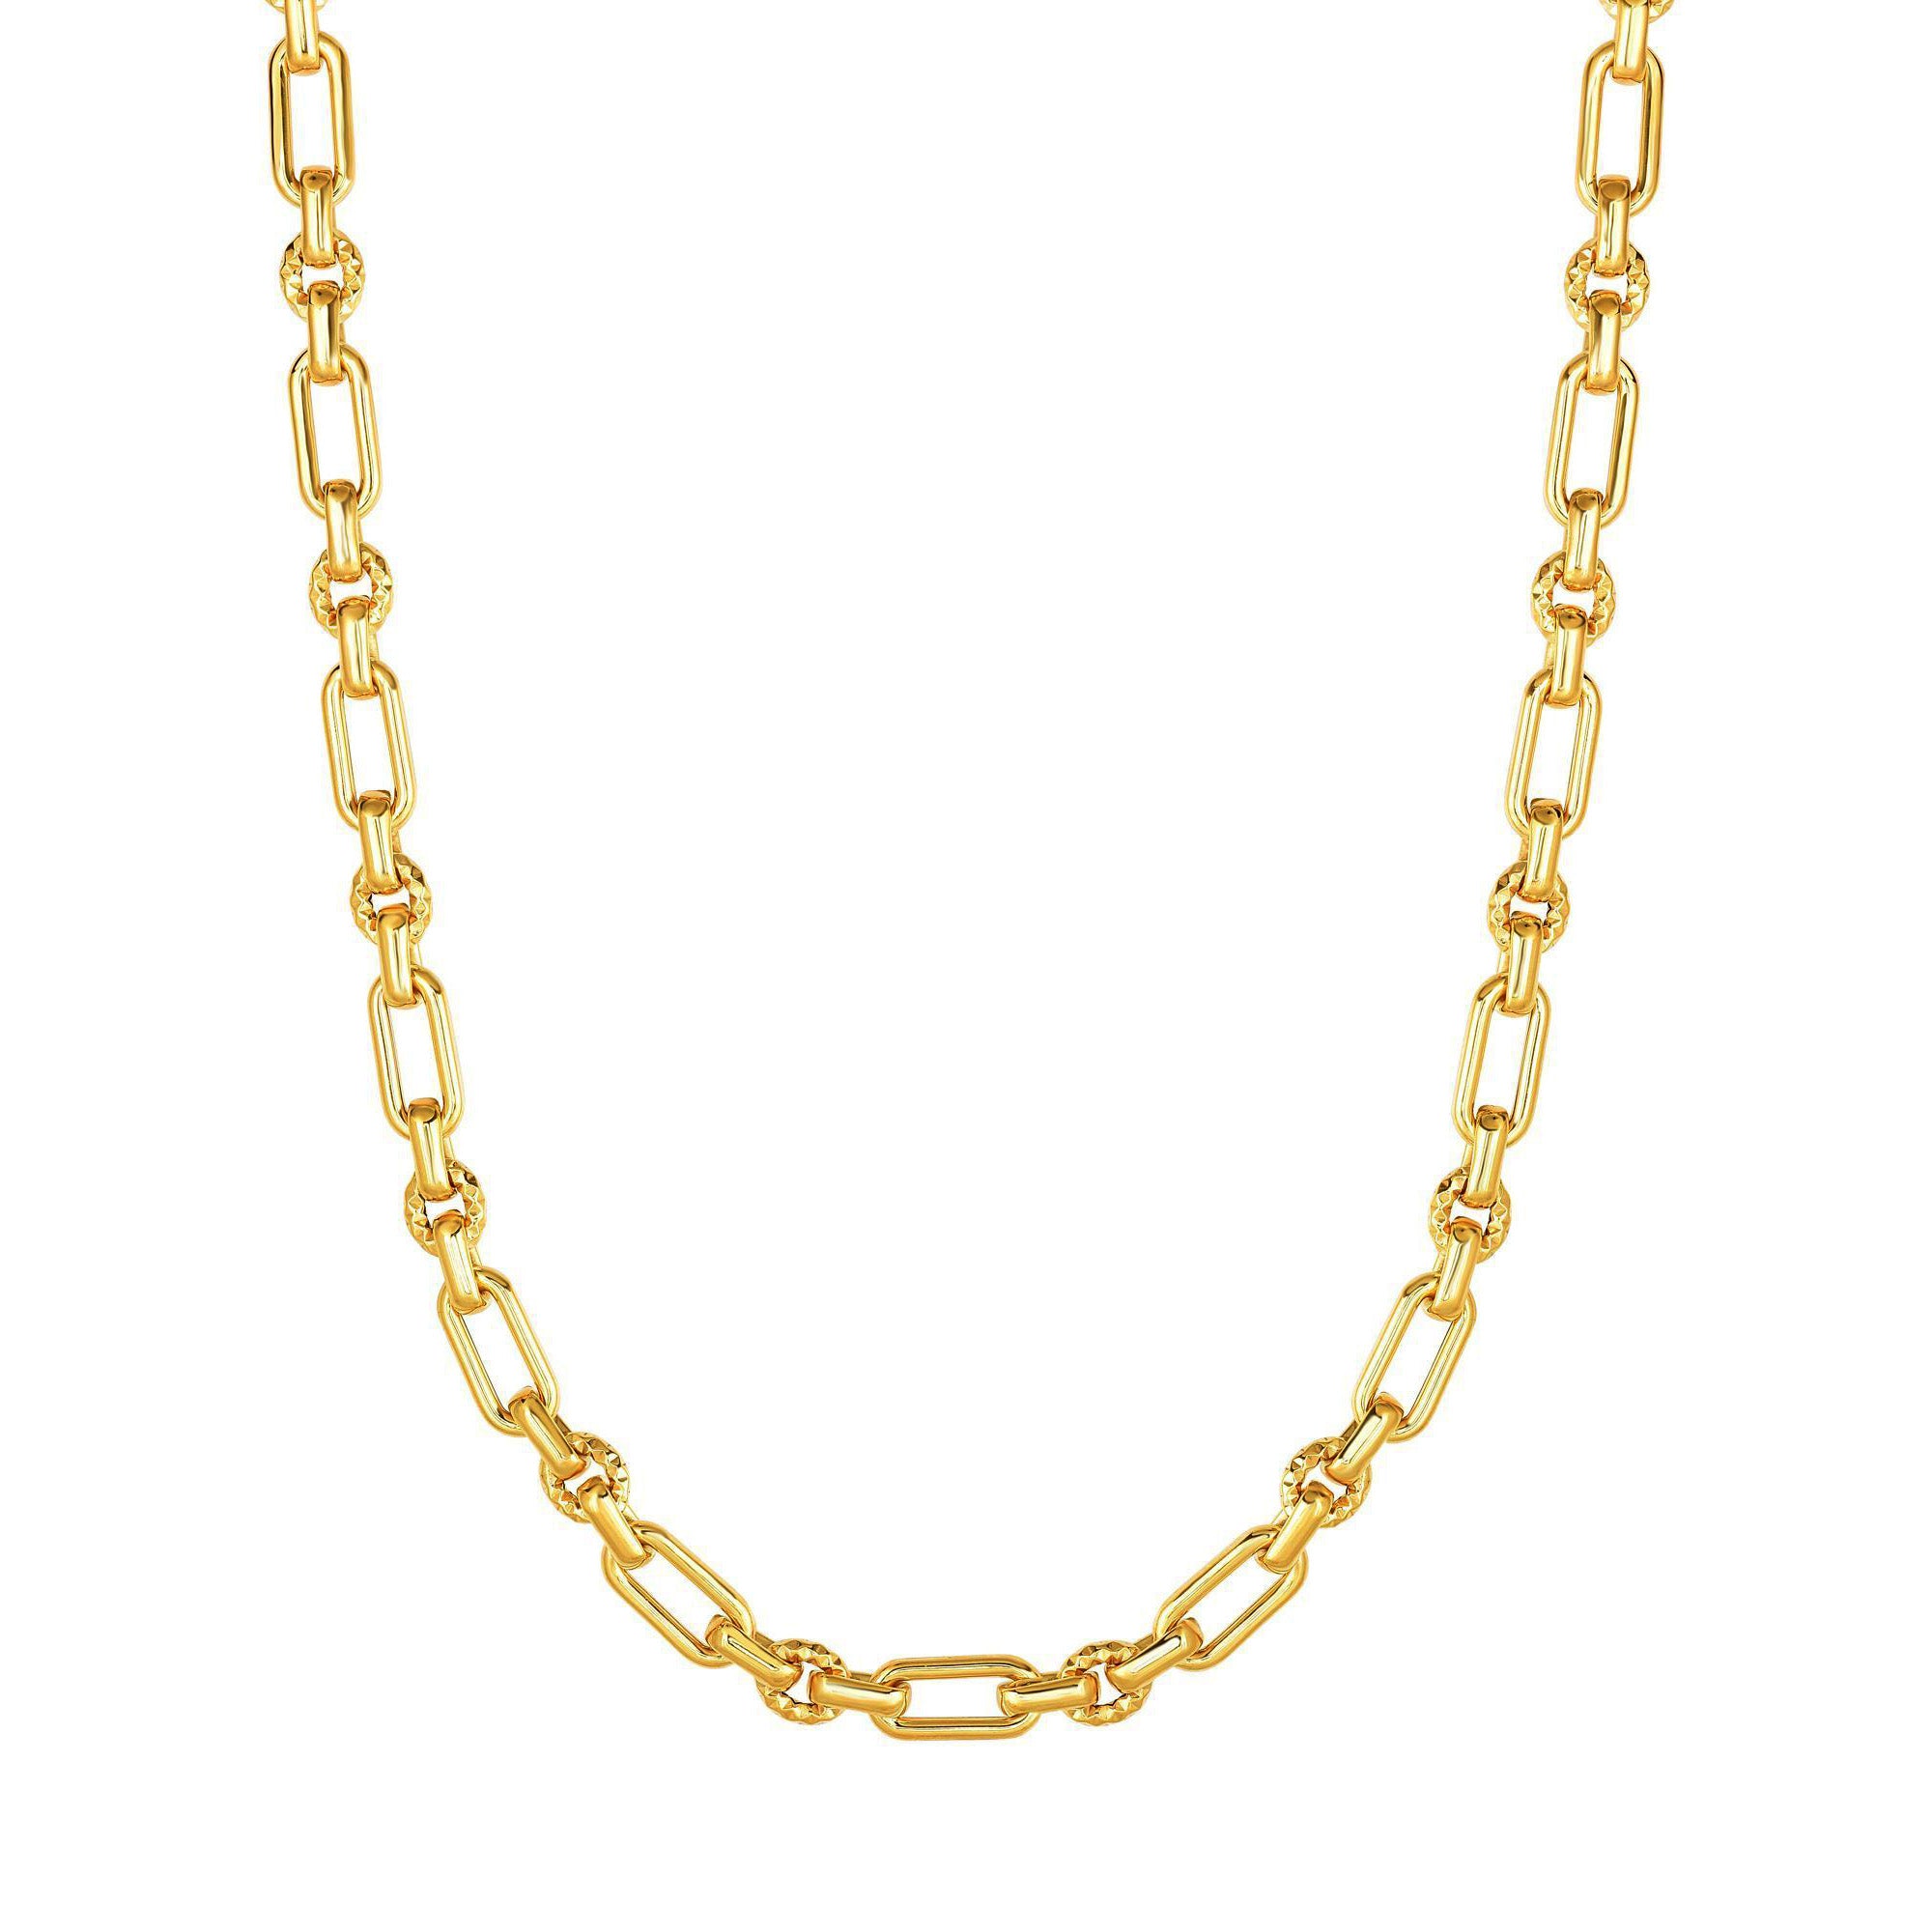 14k Yellow Gold Diamond Cut Oval Link Chain Womens Necklace, 18" fine designer jewelry for men and women